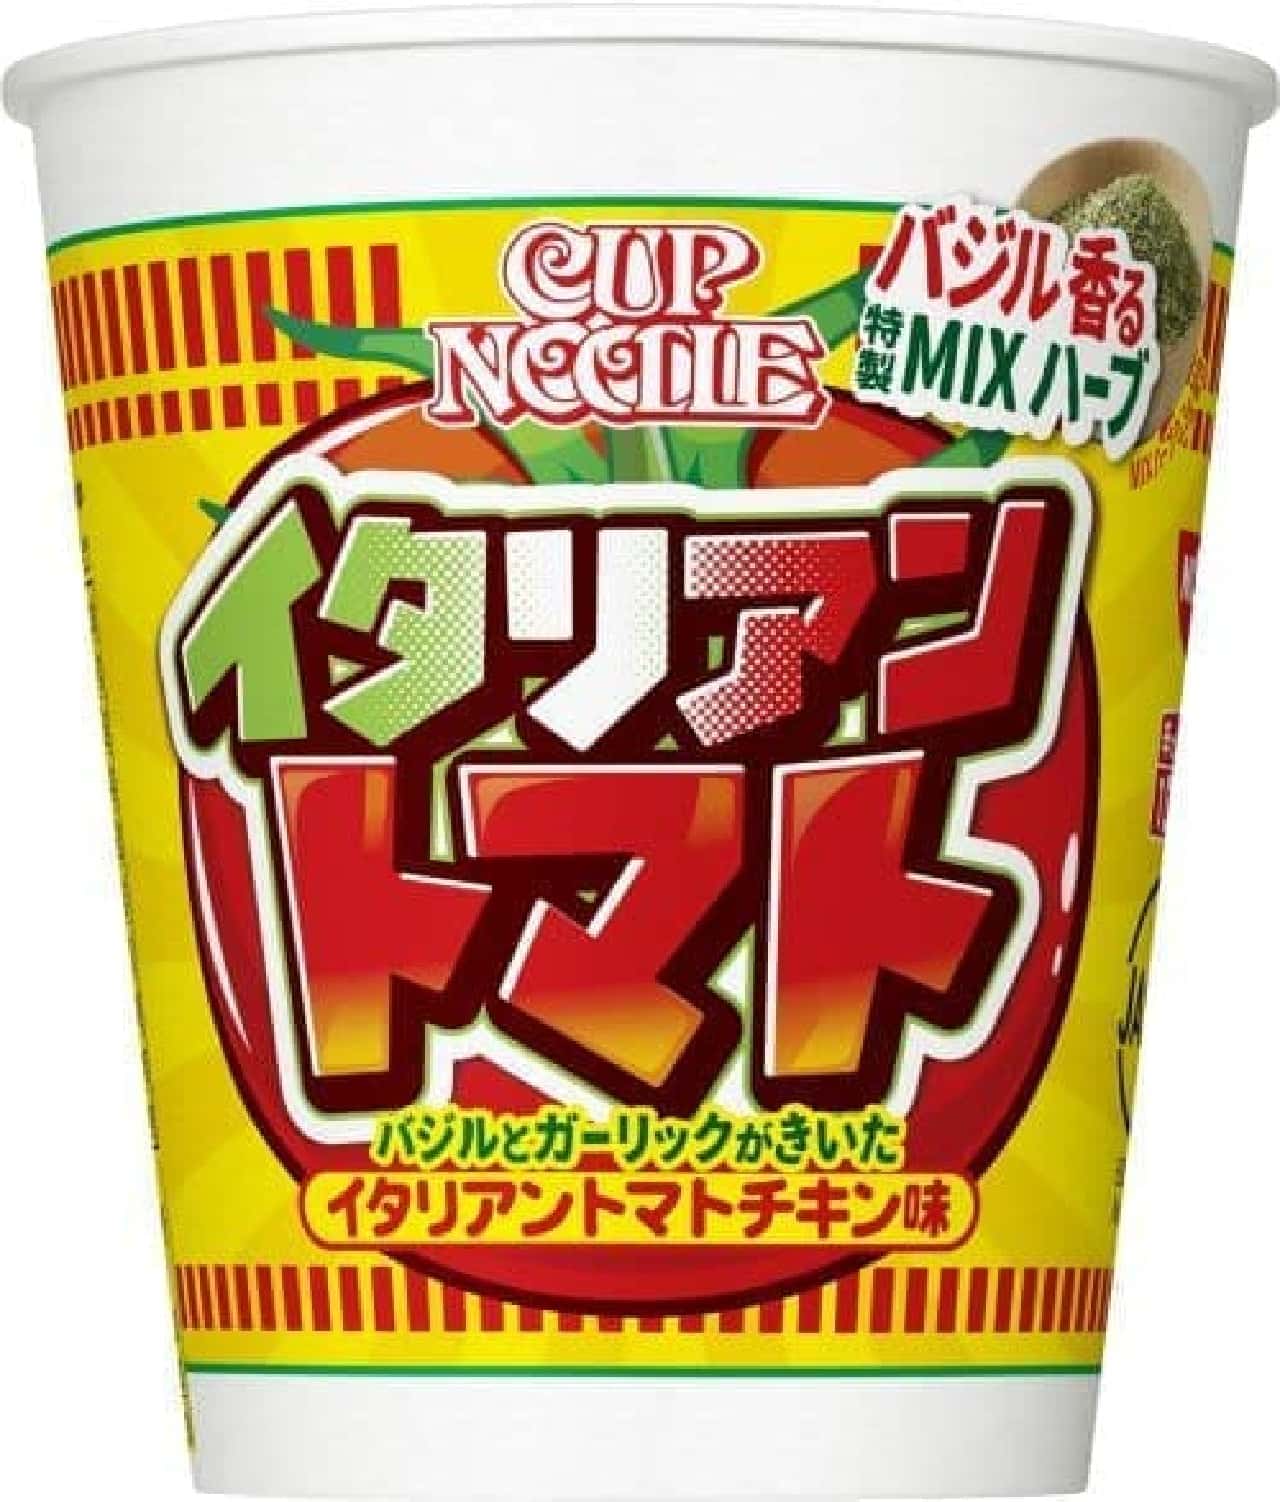 Nissin Foods "Cup Noodle Italian Tomato"